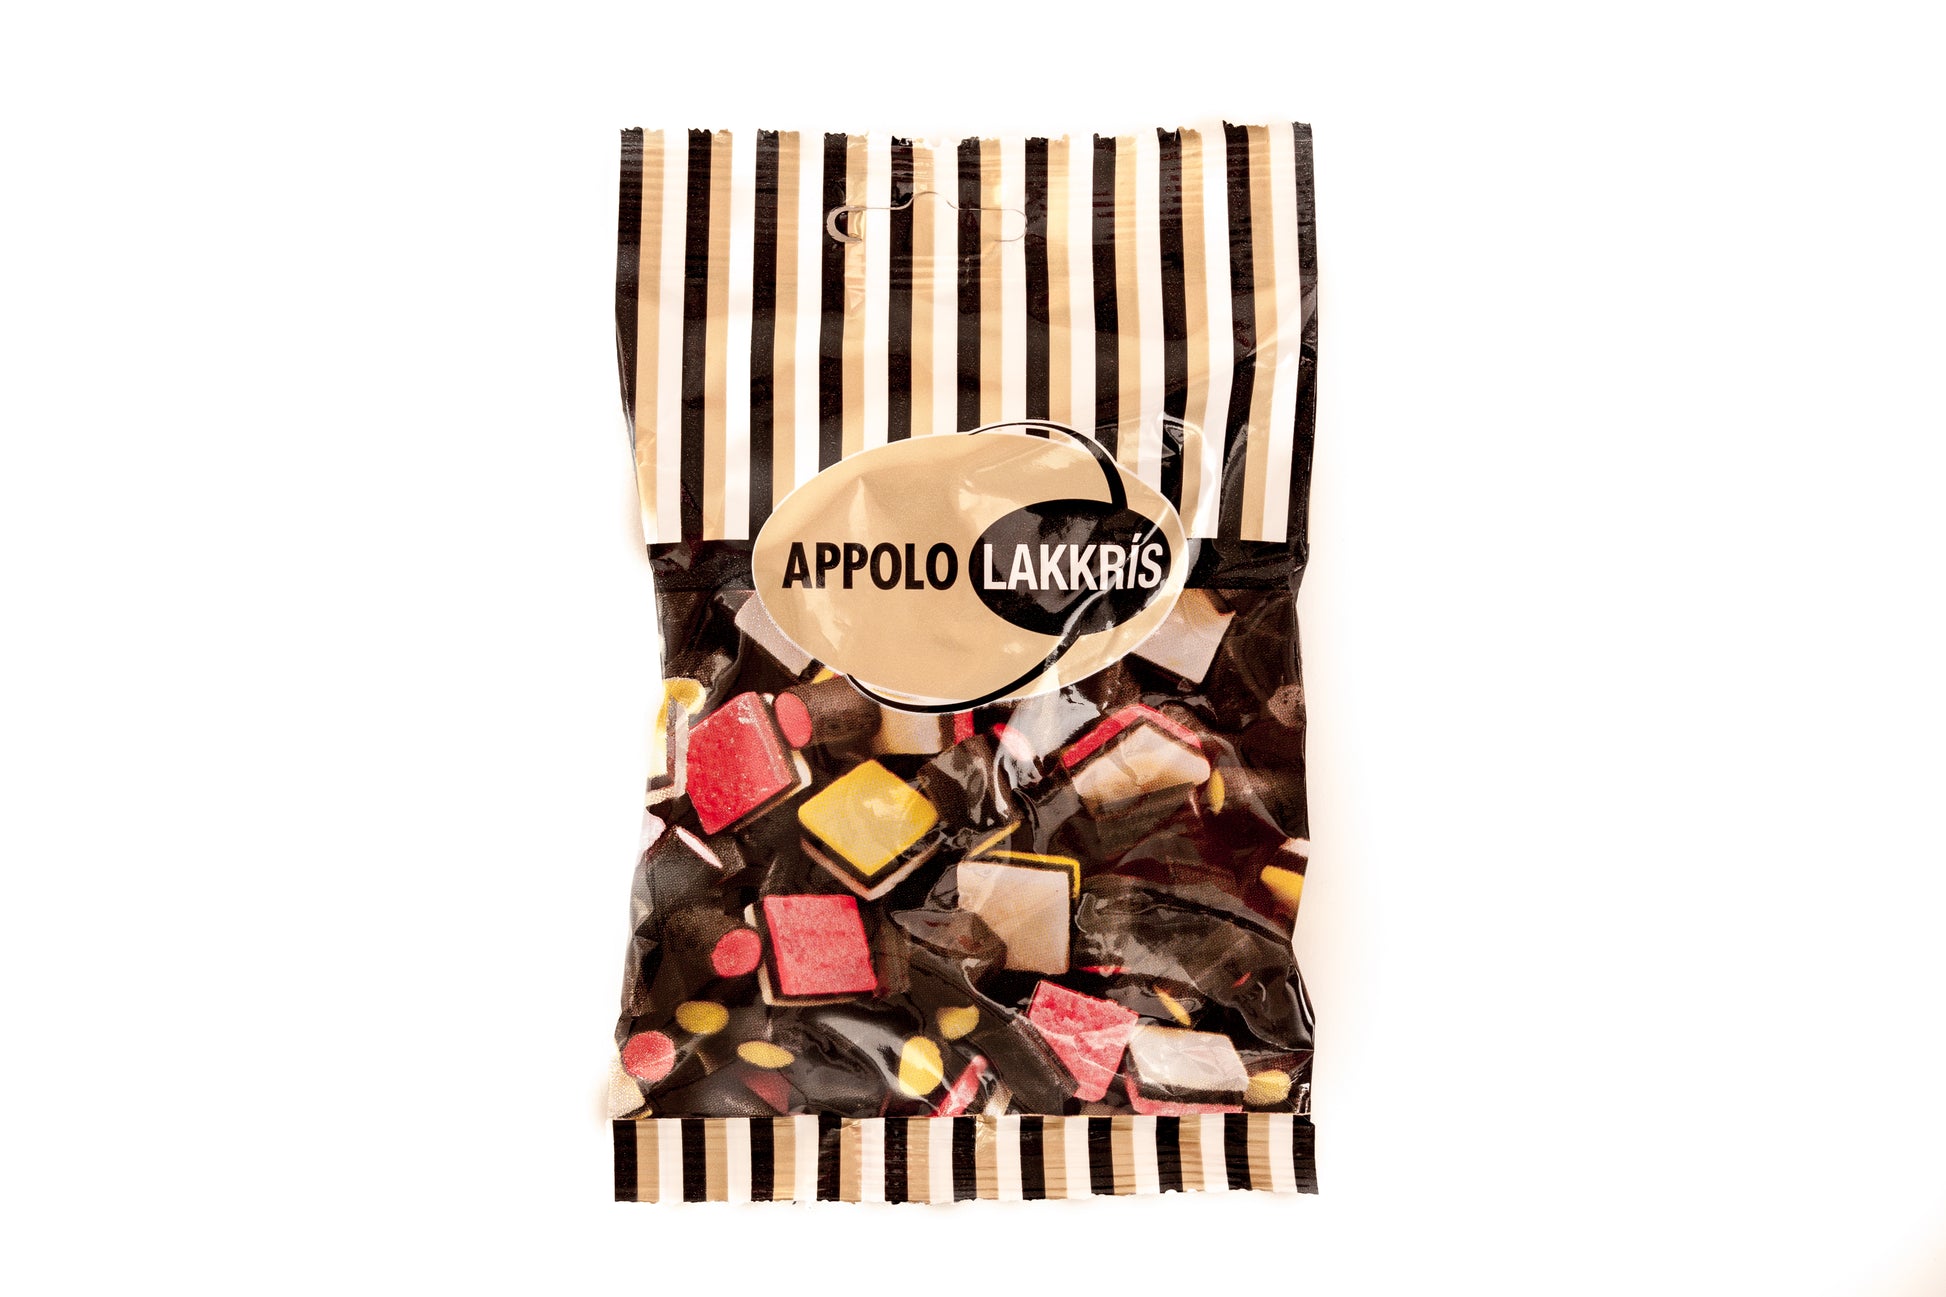 Assorted Black Licorice Pieces , Some Coconut Cream Paste Filled or Covered. Made by Appolo in Iceland. - TopIceland